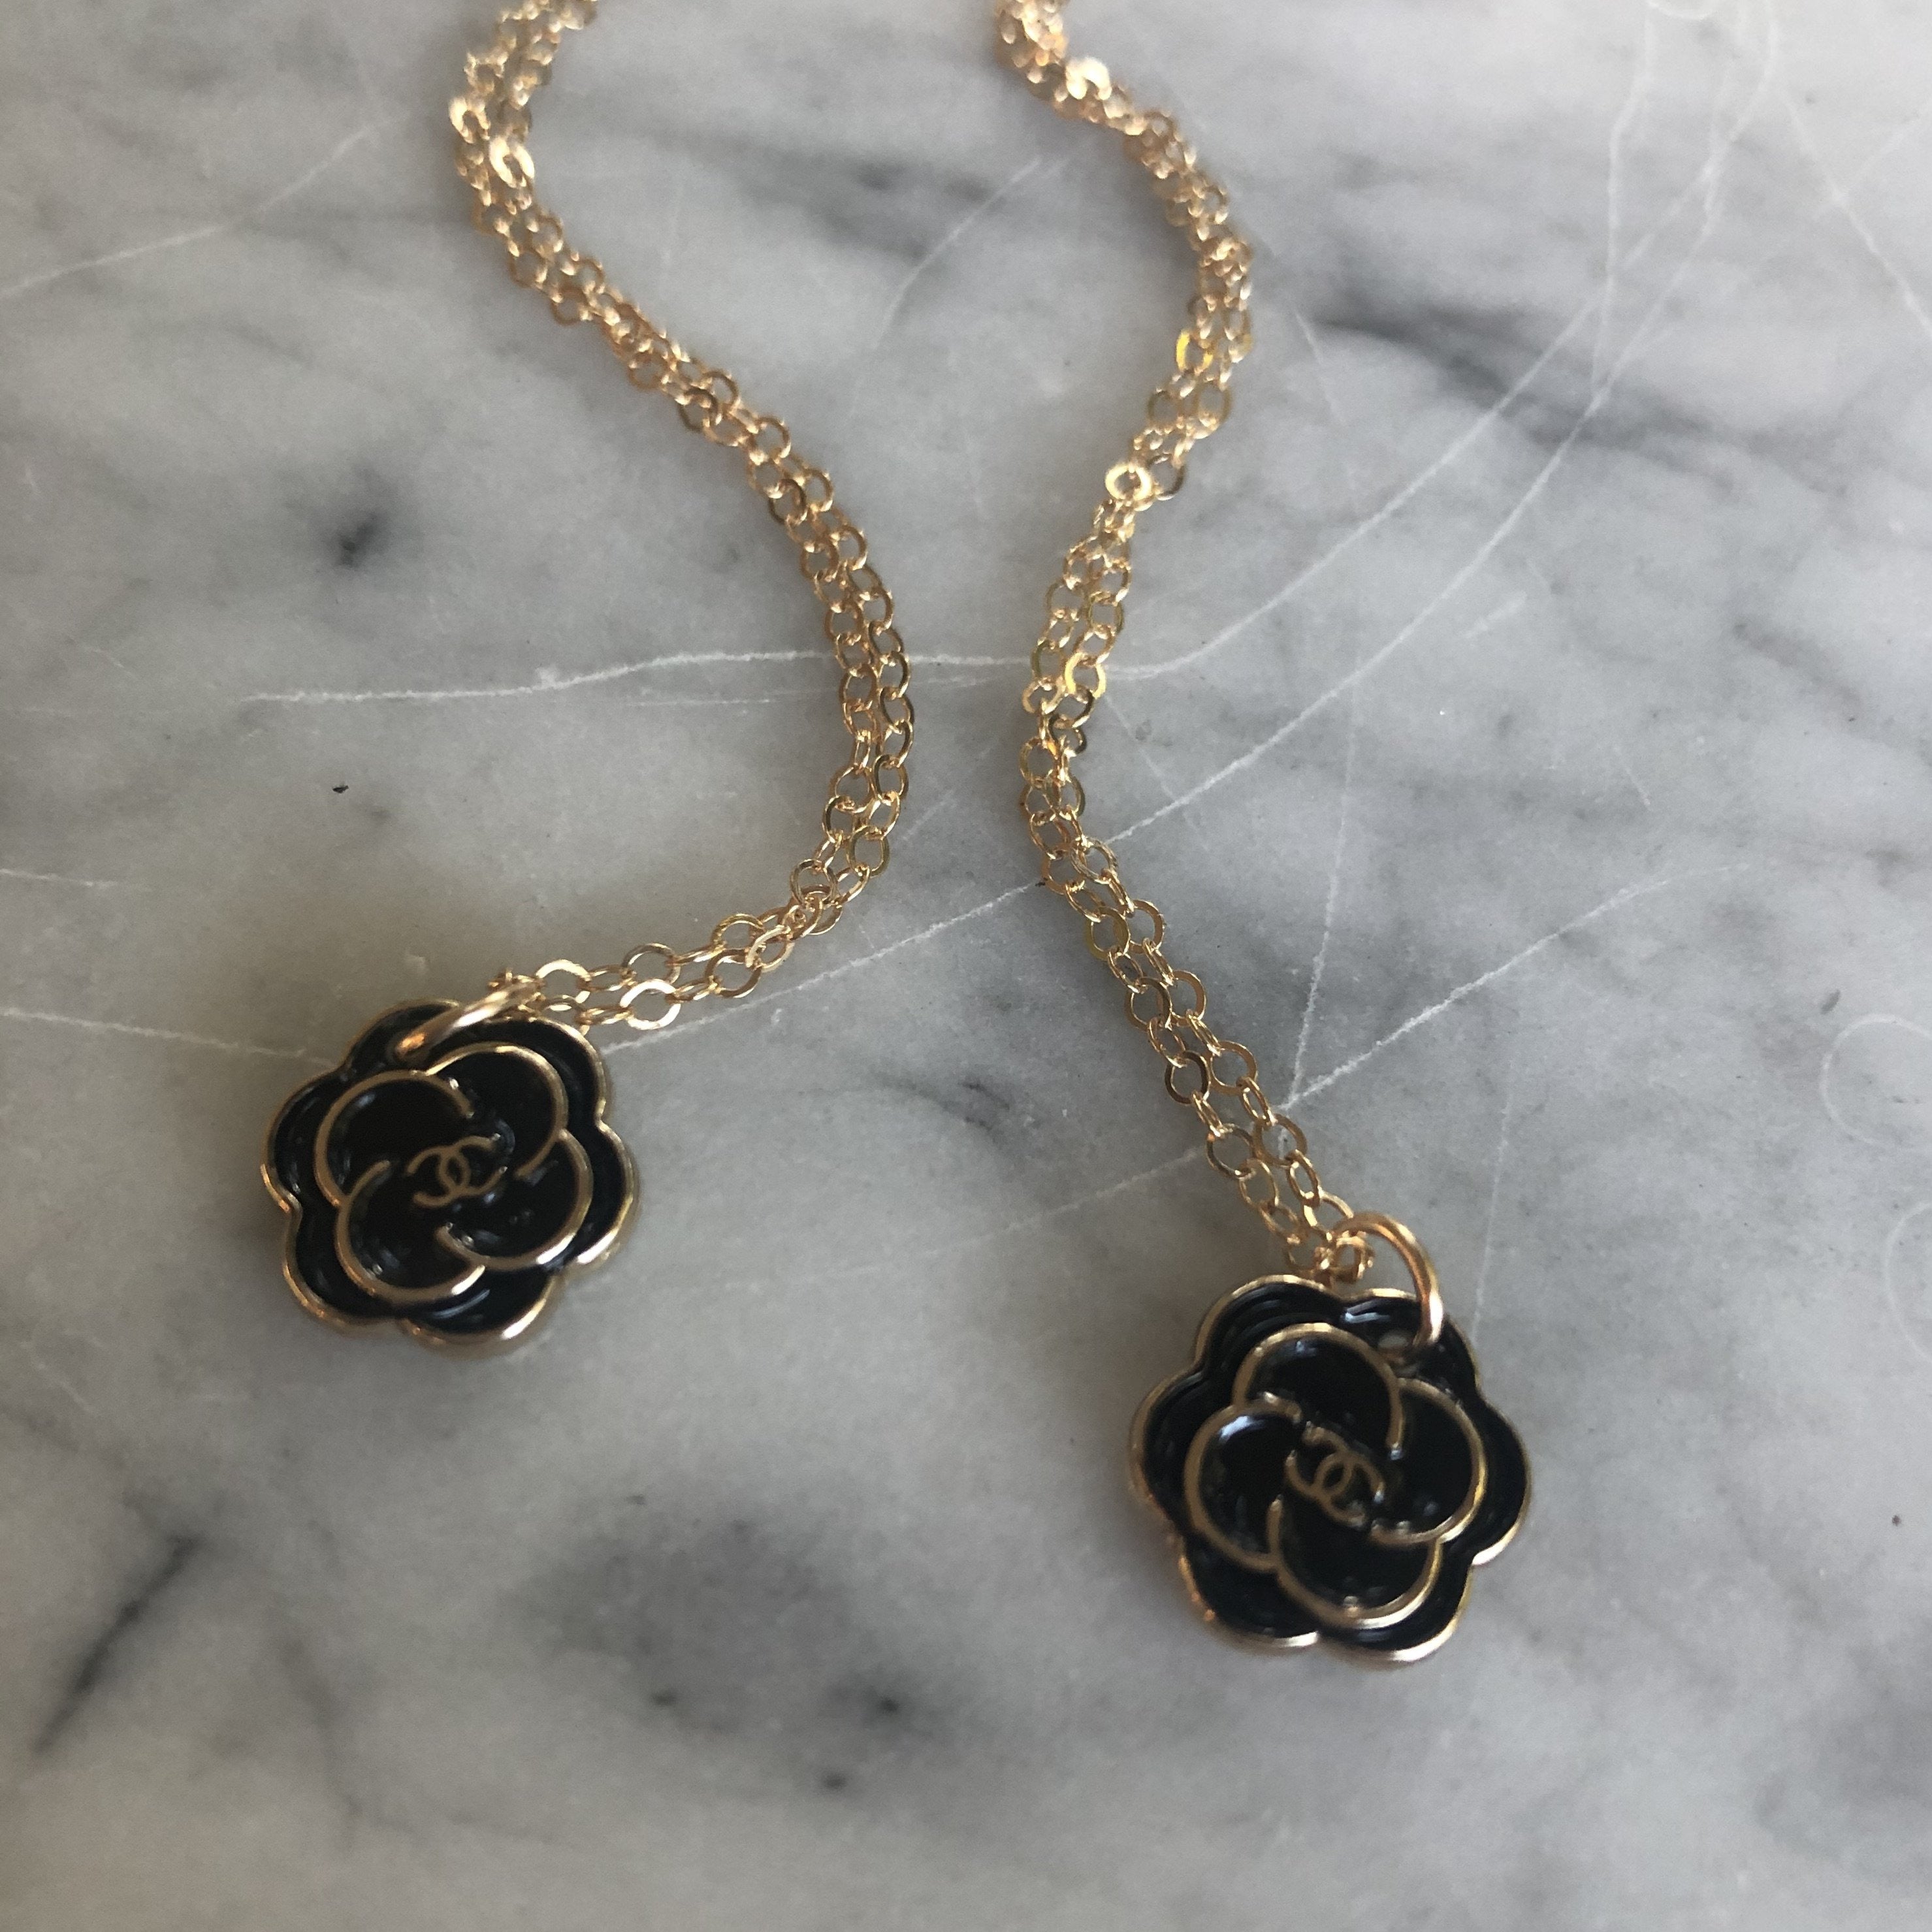 Small Gold and Black Chanel Flower Necklace